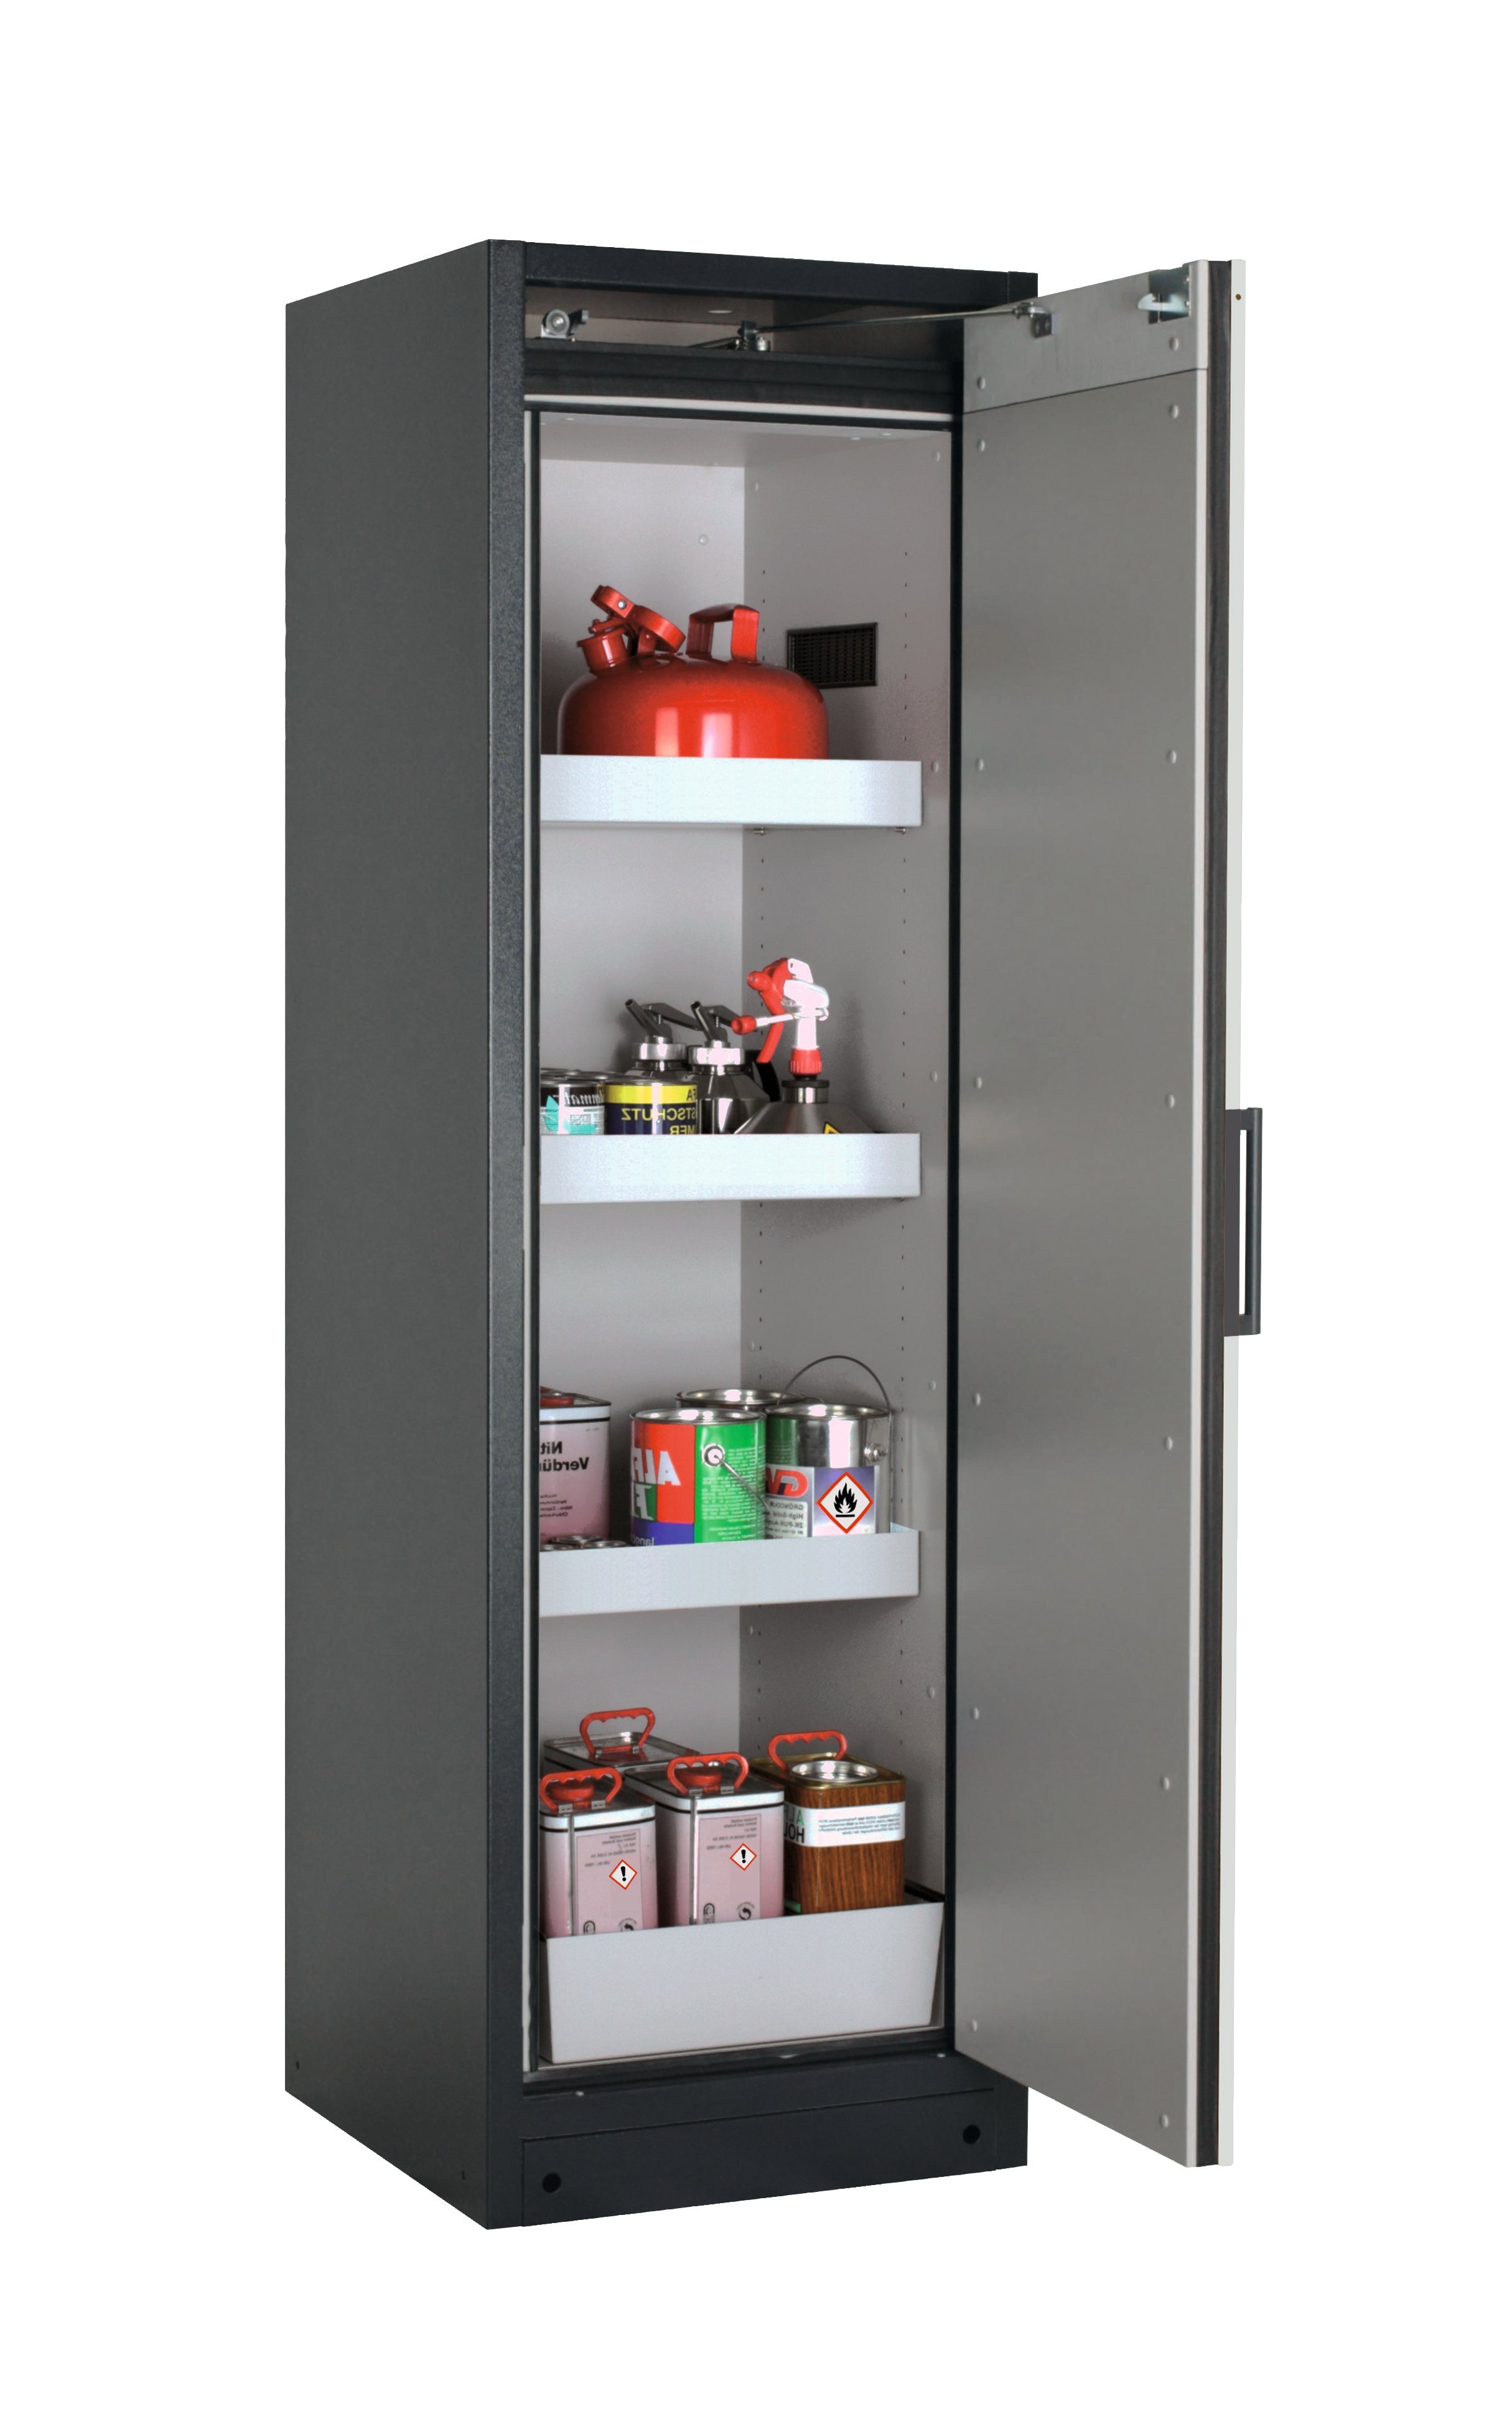 Type 90 safety storage cabinet Q-PEGASUS-90 model Q90.195.060.WDACR in light grey RAL 7035 with 3x tray shelf (standard) (sheet steel),